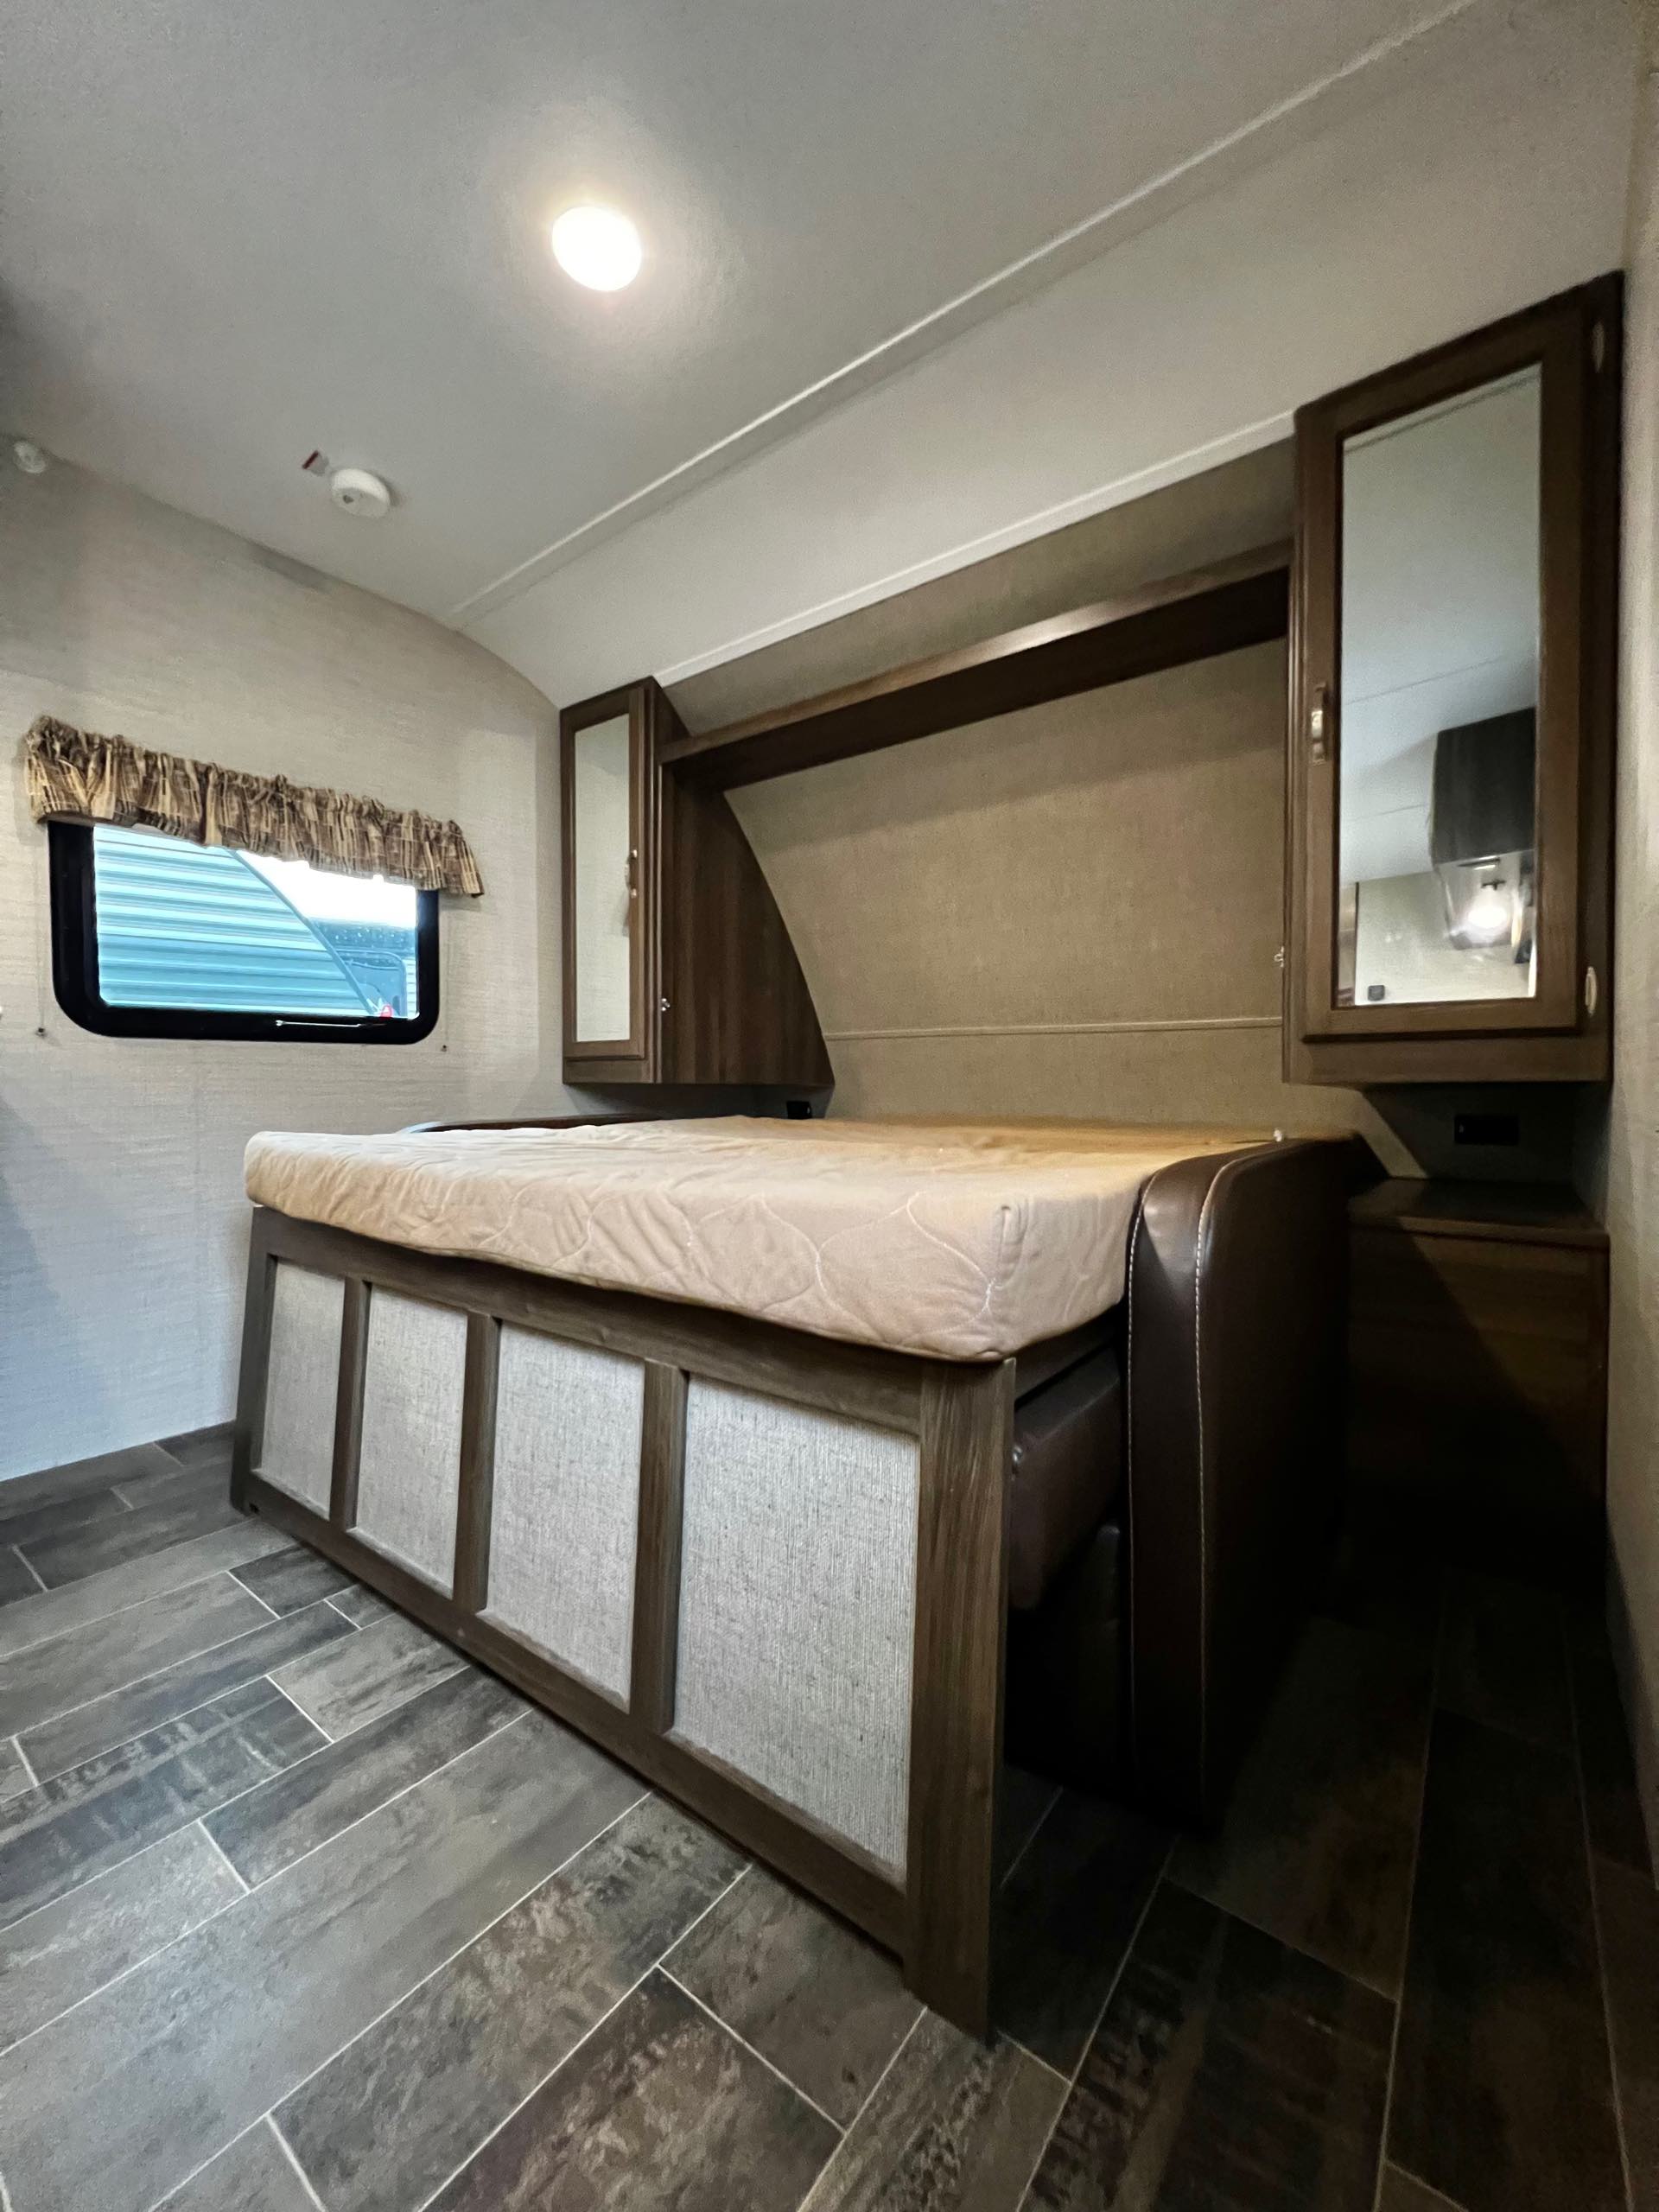 2019 Keystone Bullet Crossfire 2200BHS at Lee's Country RV